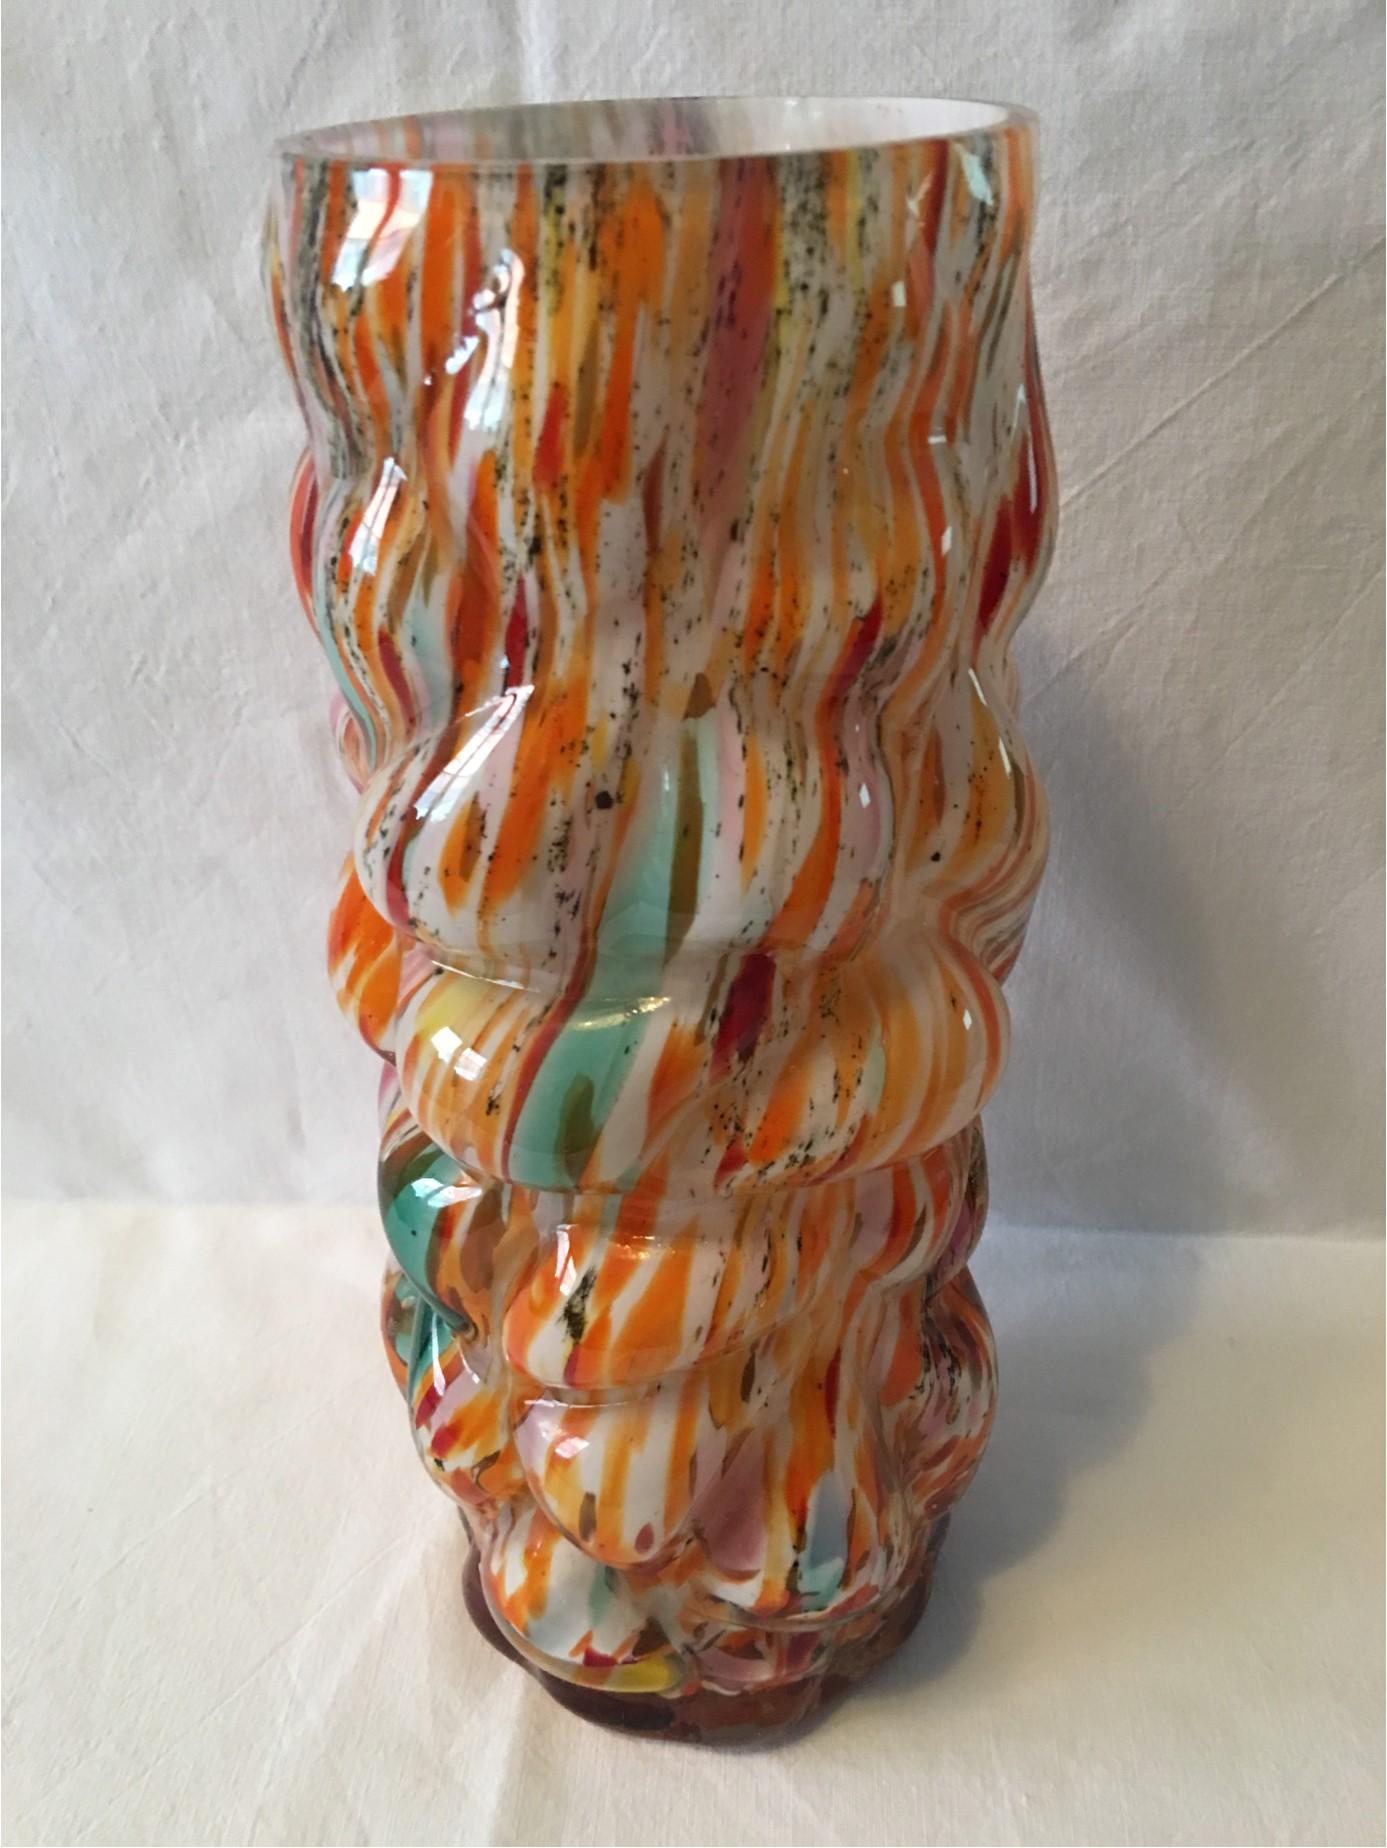 Multi-Color Hand Blown Murano Glass Vase from 1960s Italy (Mitte des 20. Jahrhunderts) im Angebot